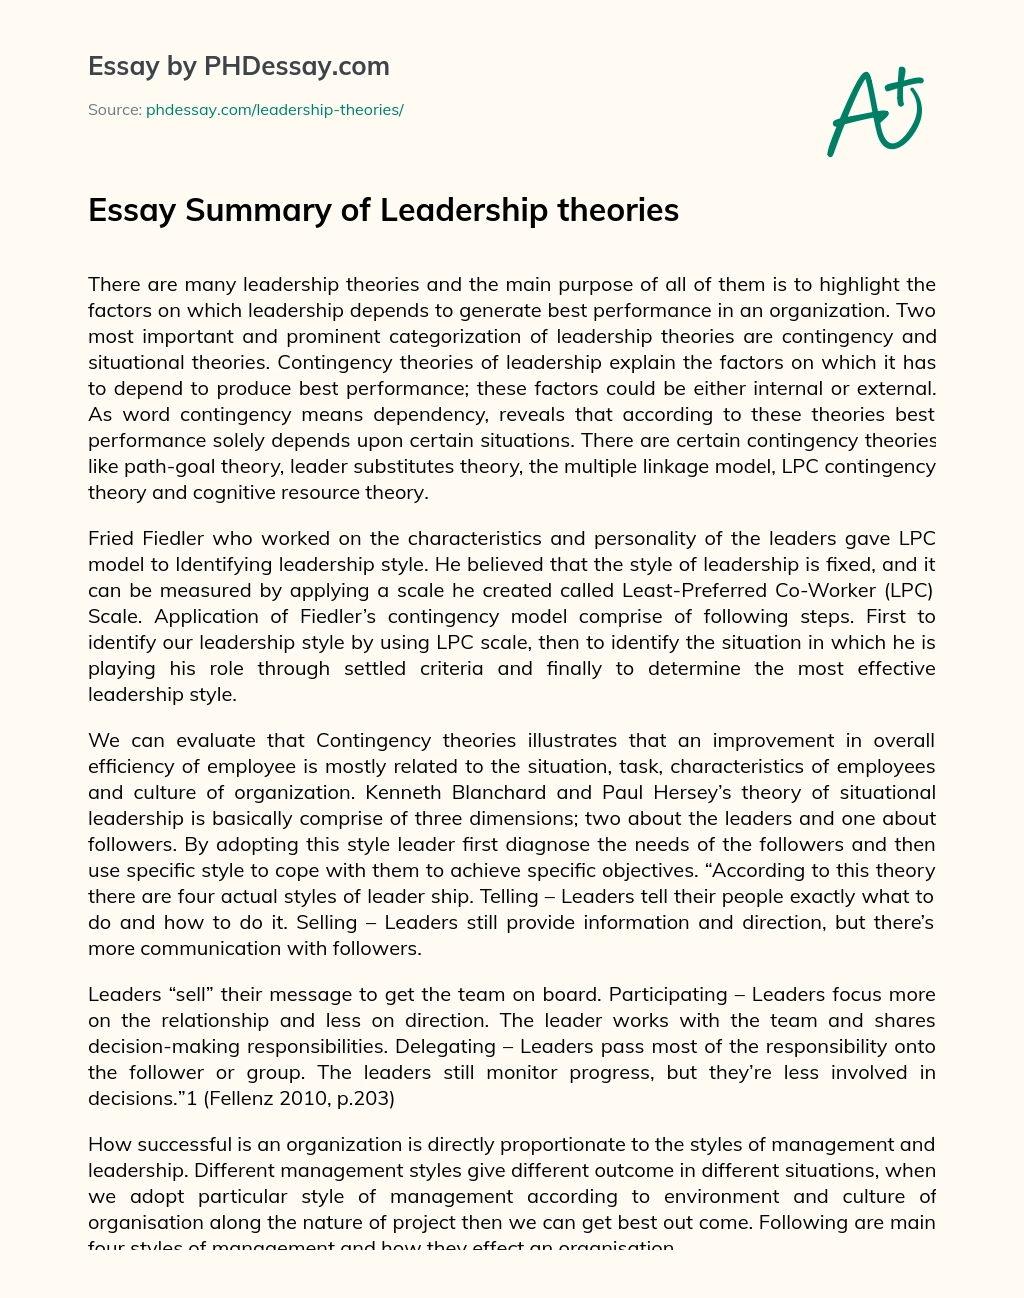 what leadership means to you essay